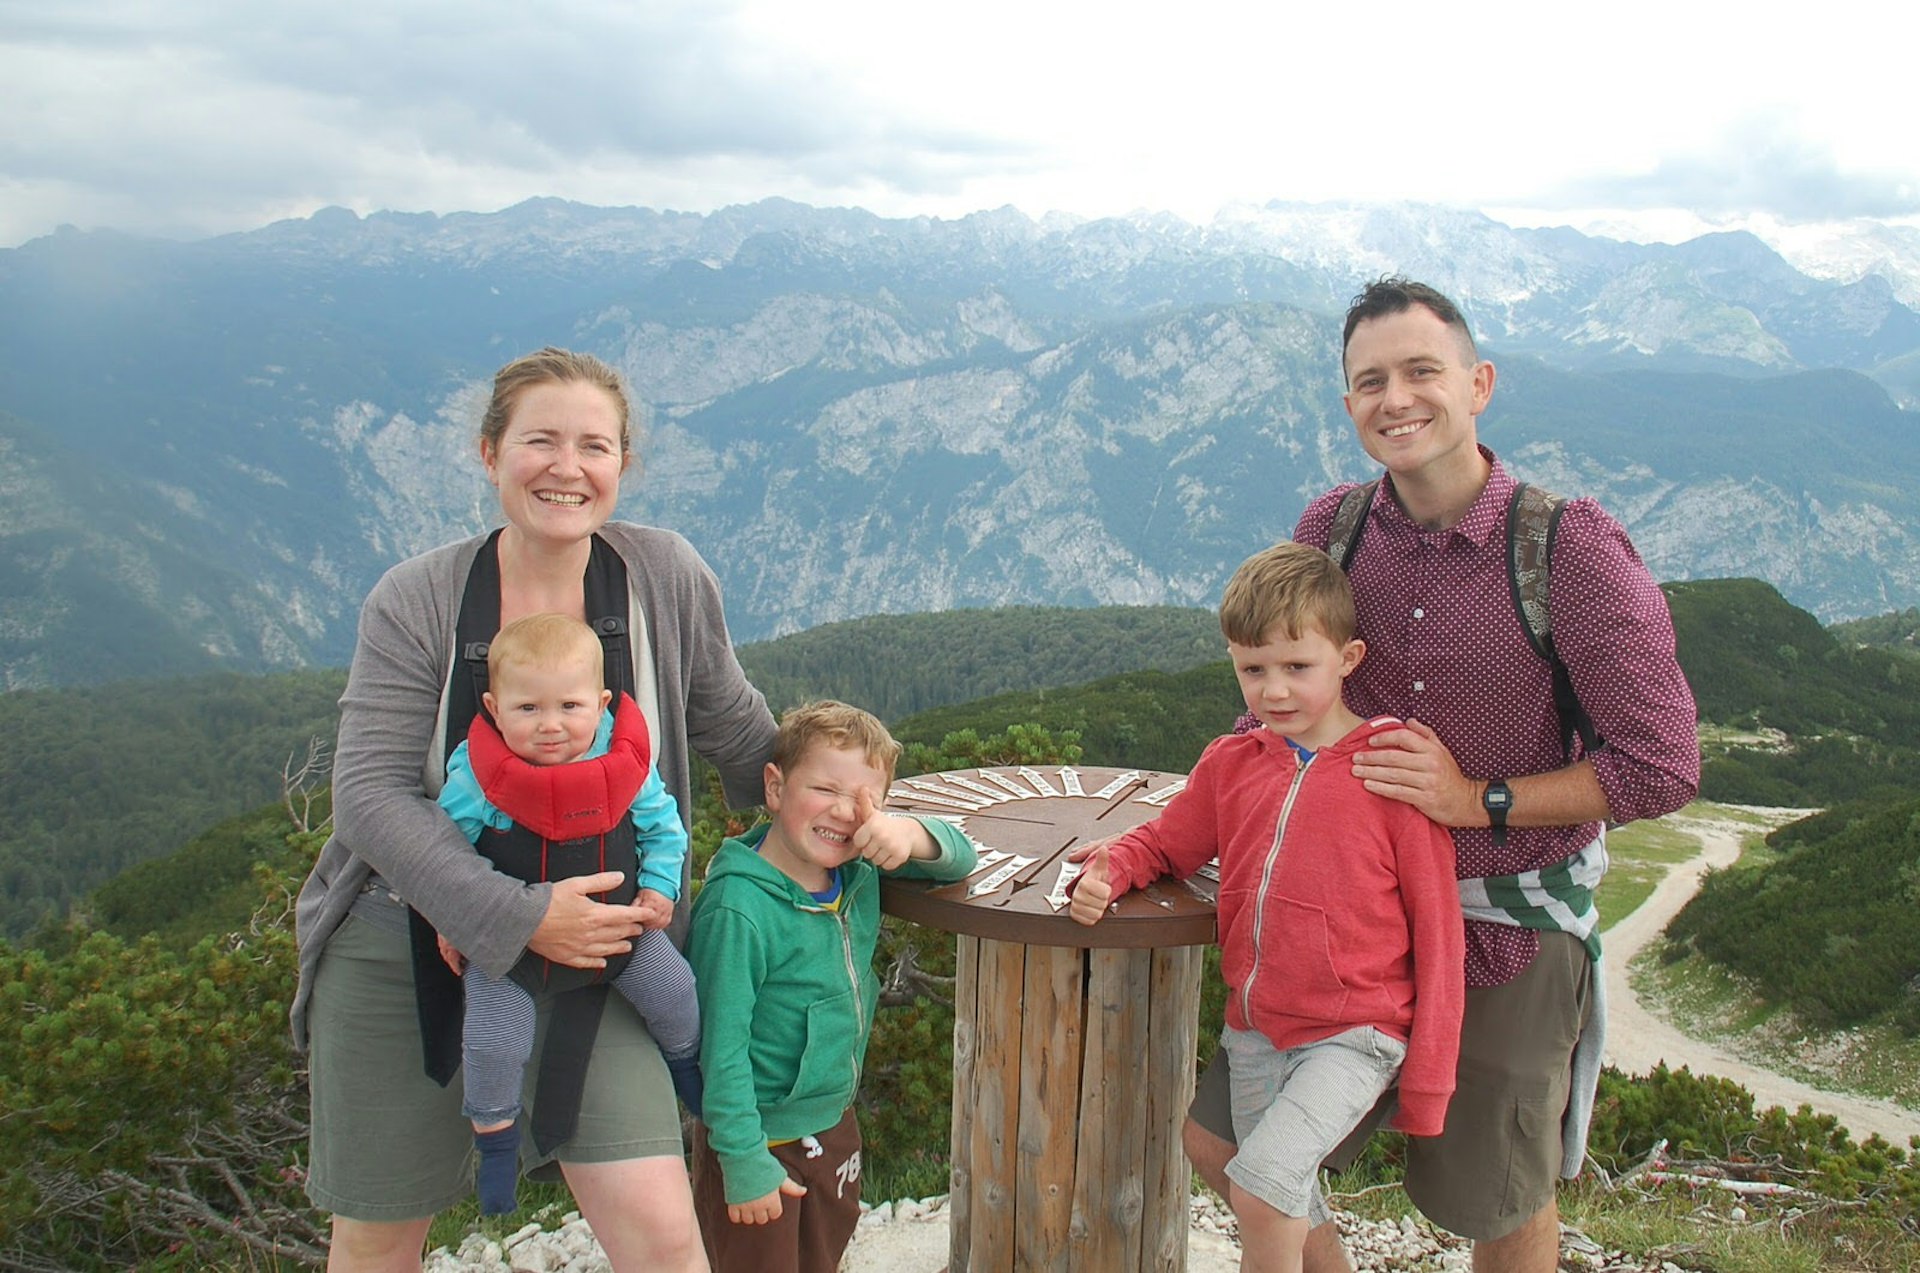 Imogen, her husband Tom and their three young children stand in front of a mountainous view in Slovenia